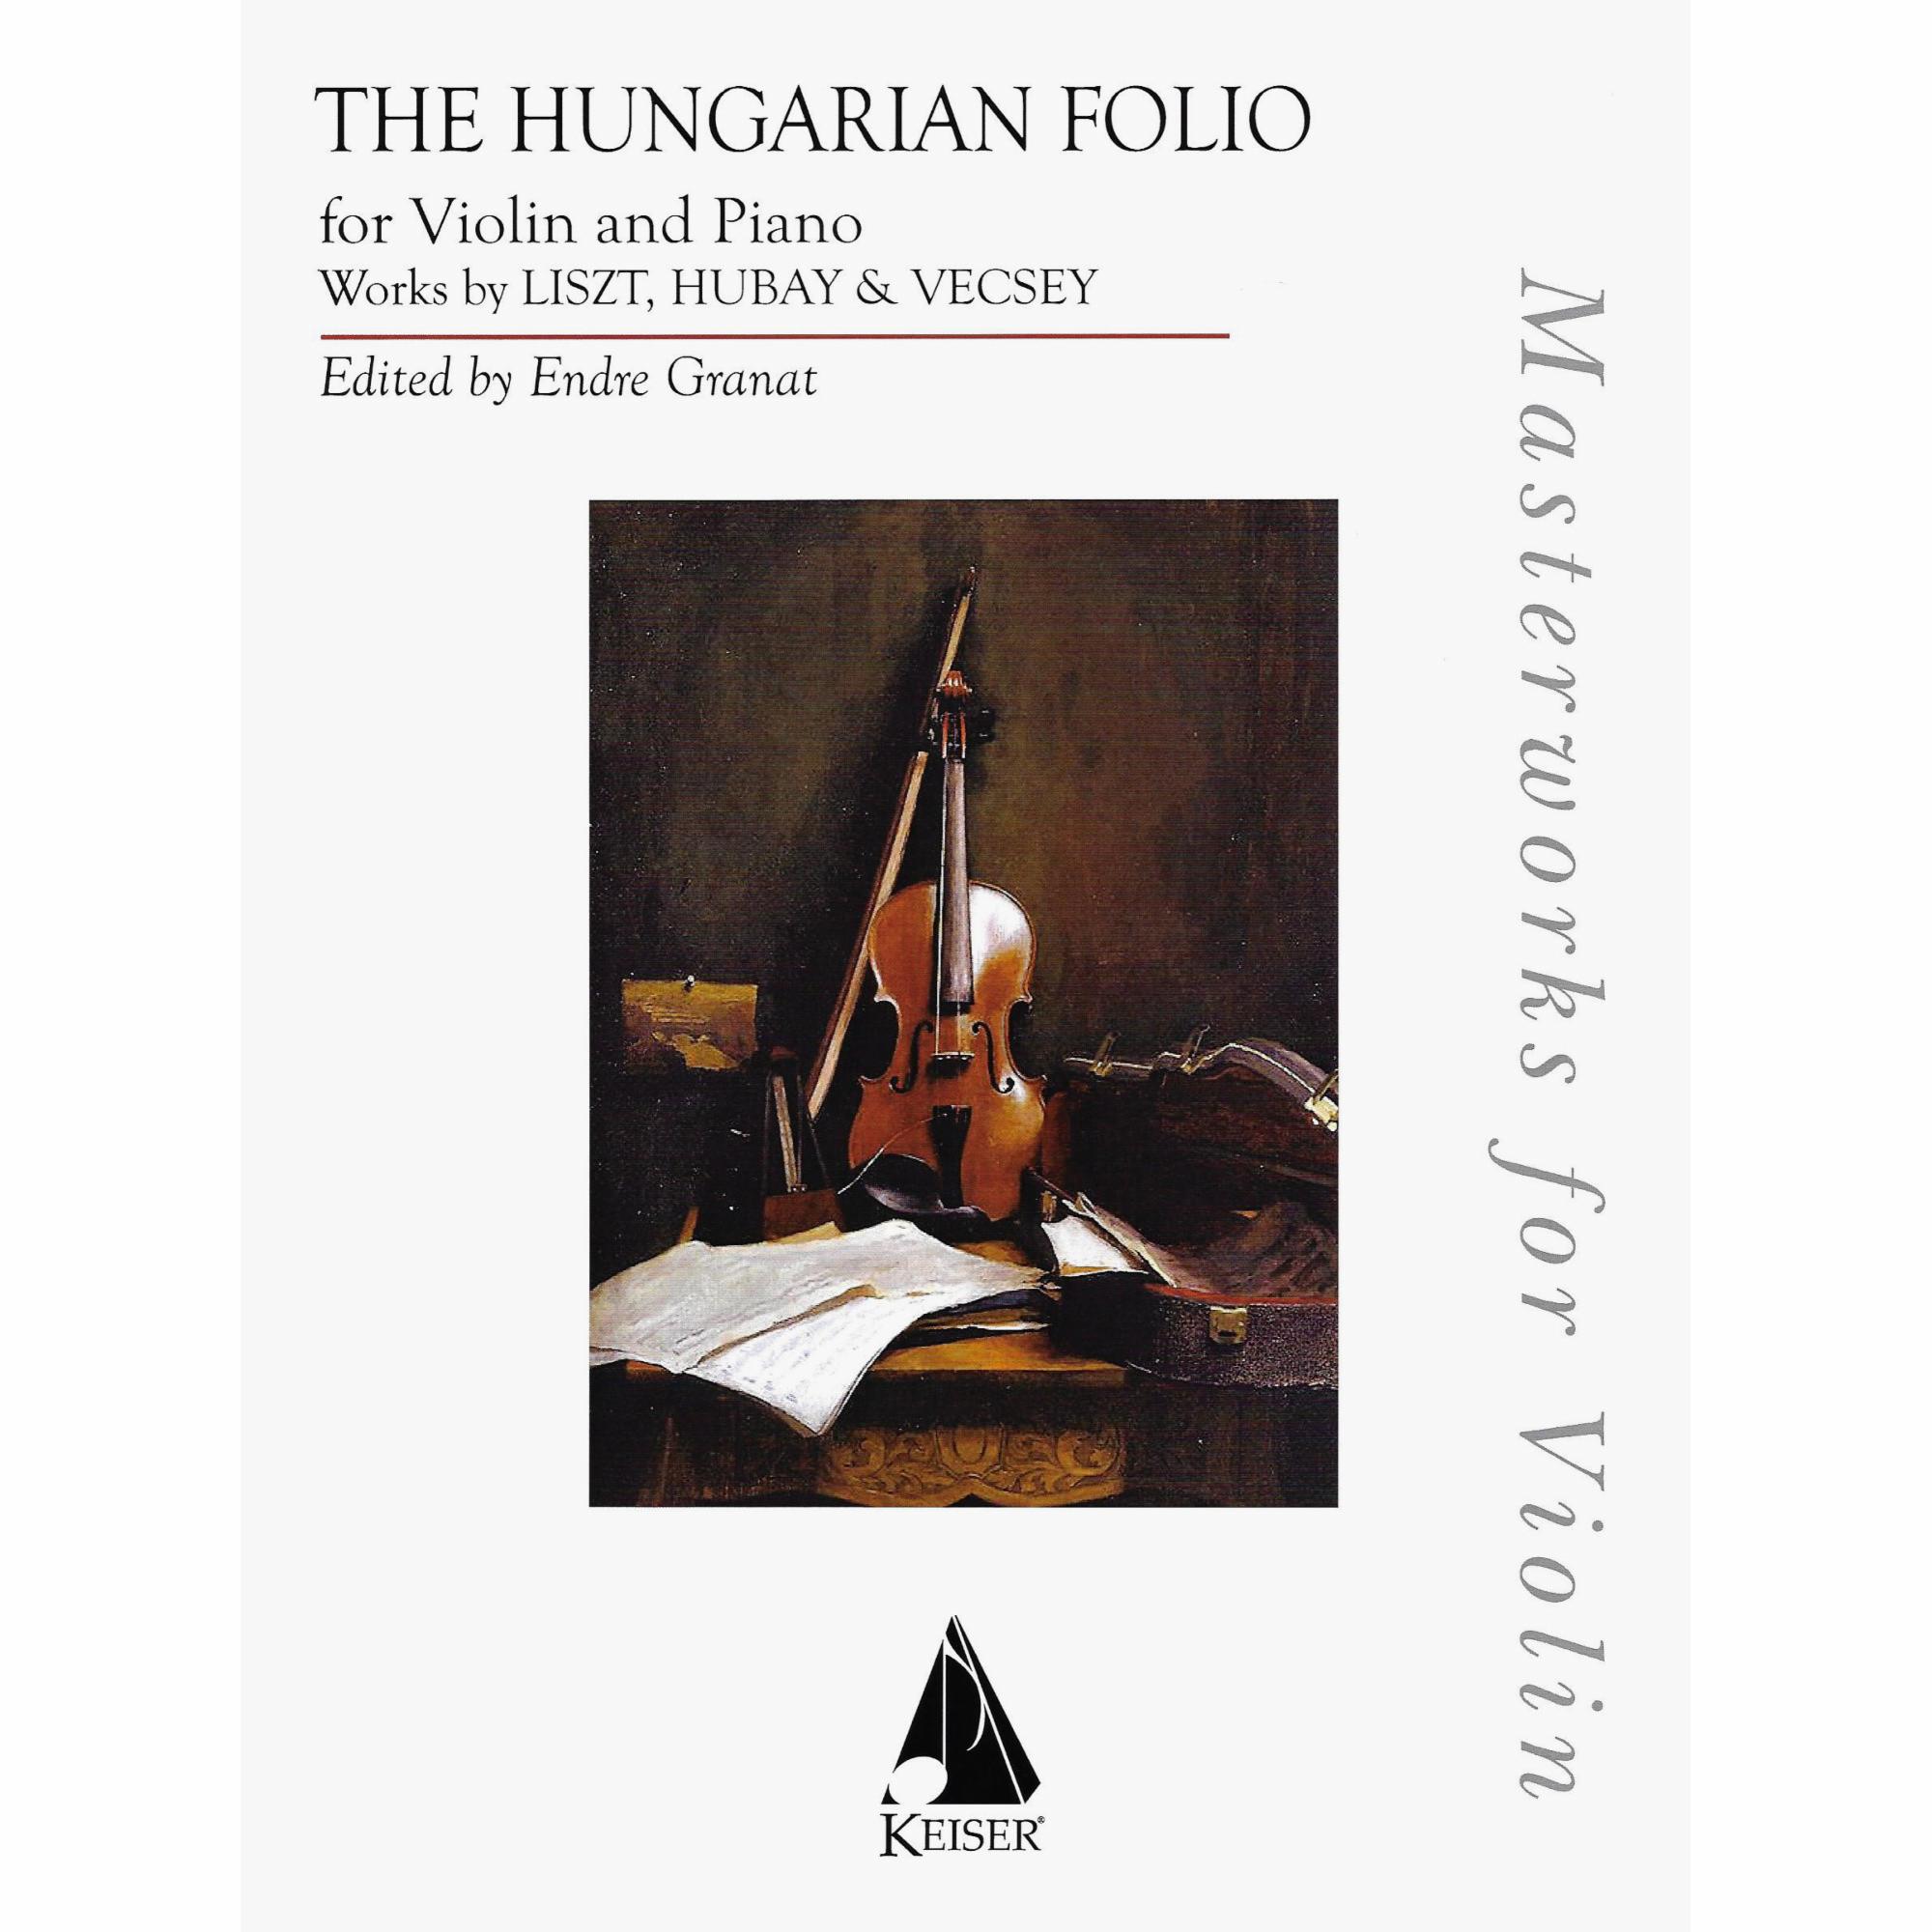 The Hungarian Folio for Violin and Piano